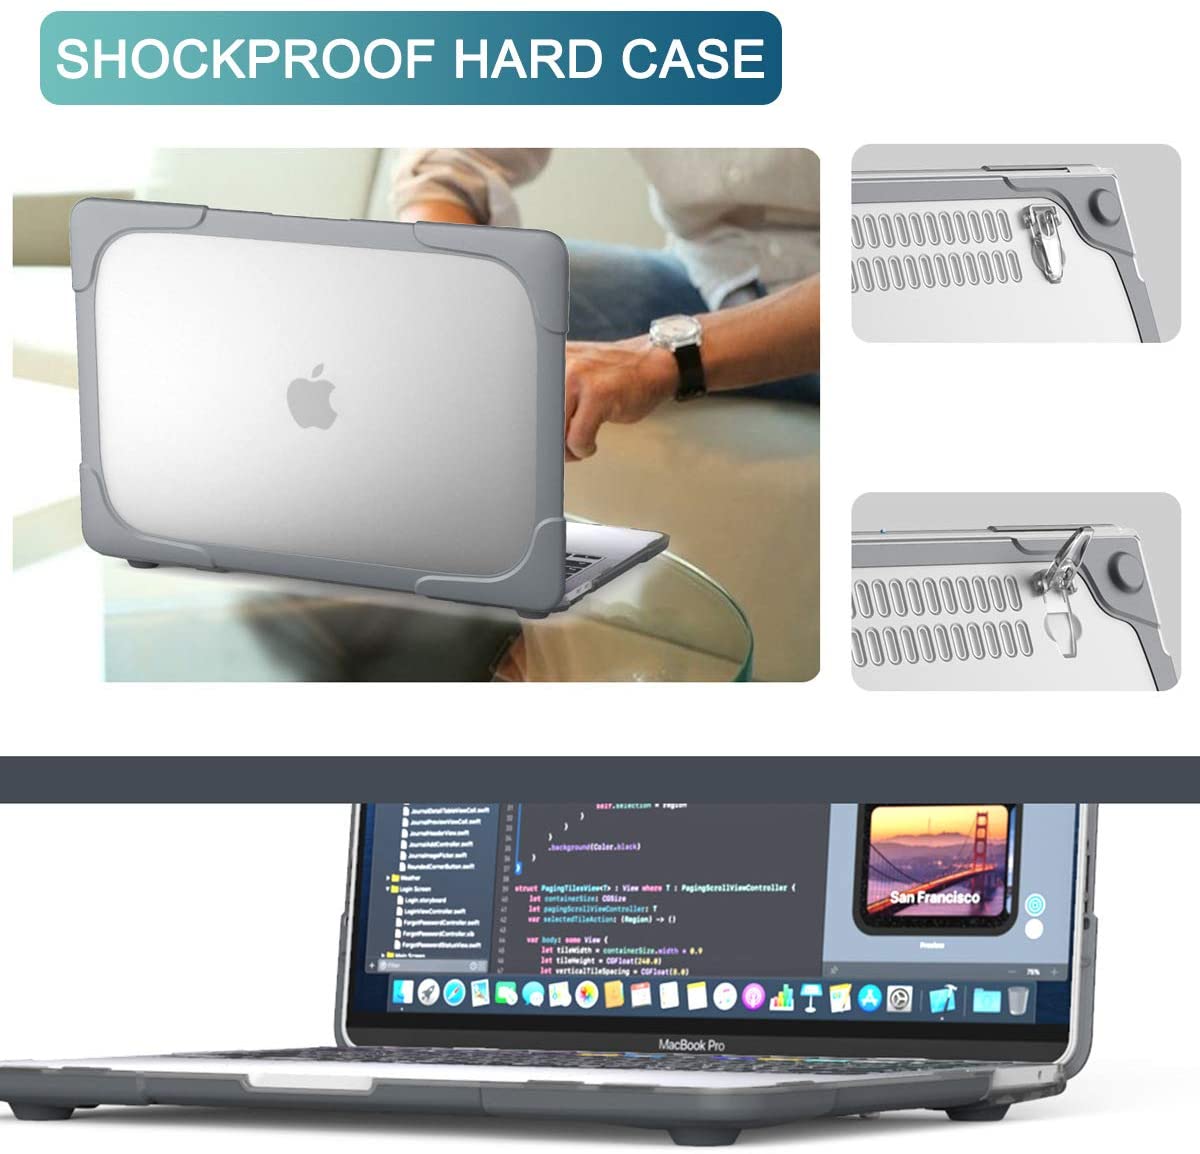 MacBook Case Heavy Duty  with Folding Stand - Grey